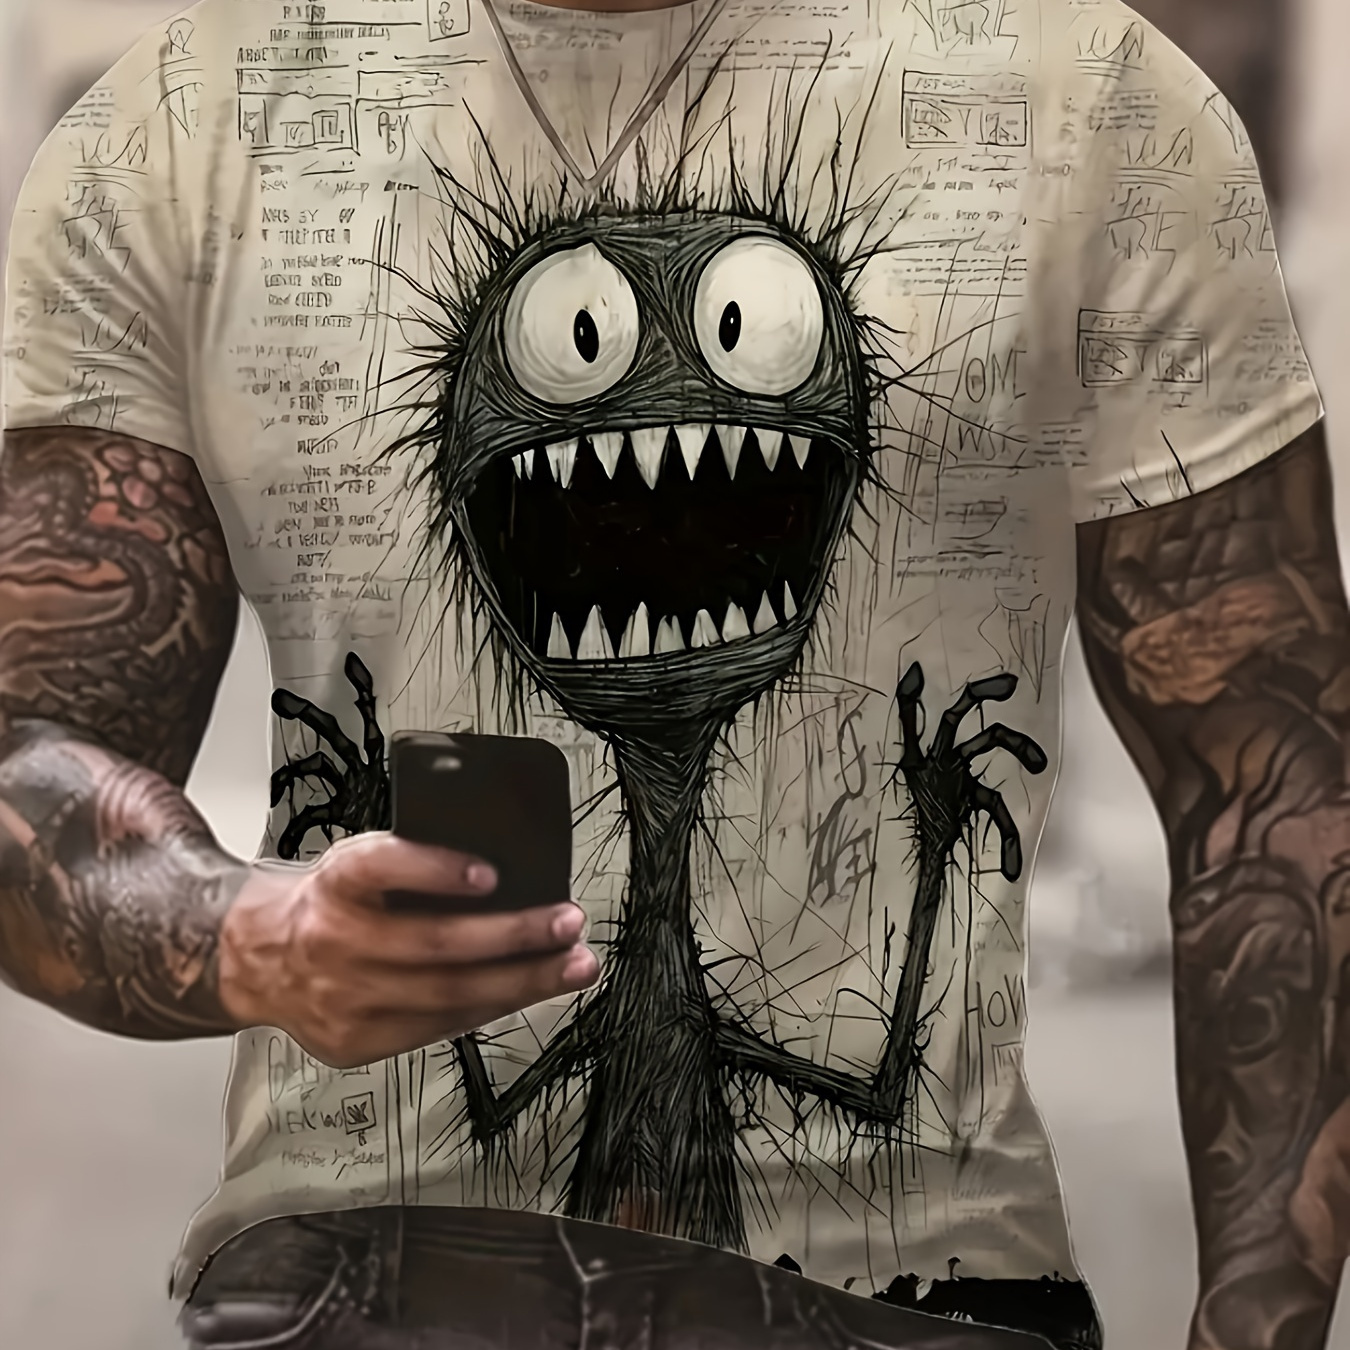 

Screaming Monster Pattern Crew Neck And Short Sleeve T-shirt, Chic And Stylish Tops For Men's Summer Outdoors Wear